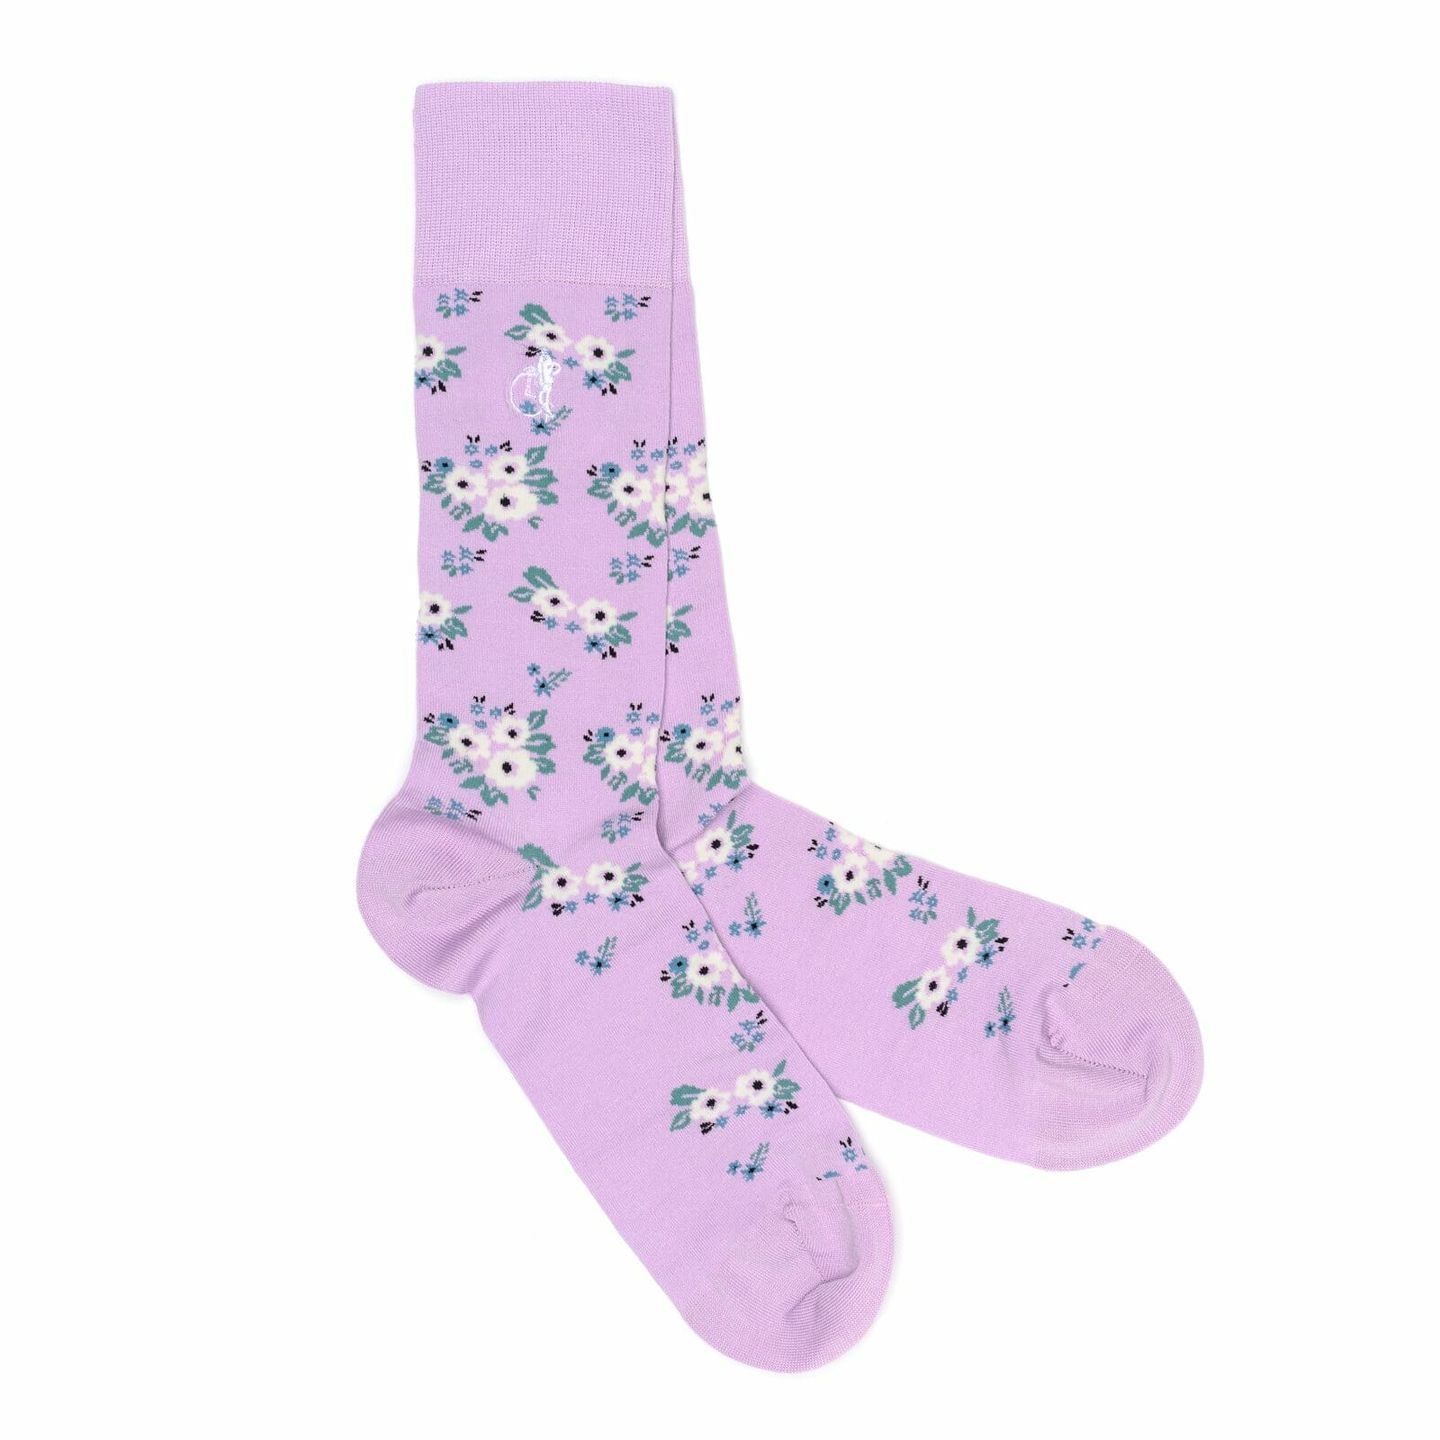 A pair of pink socks with flowers on them